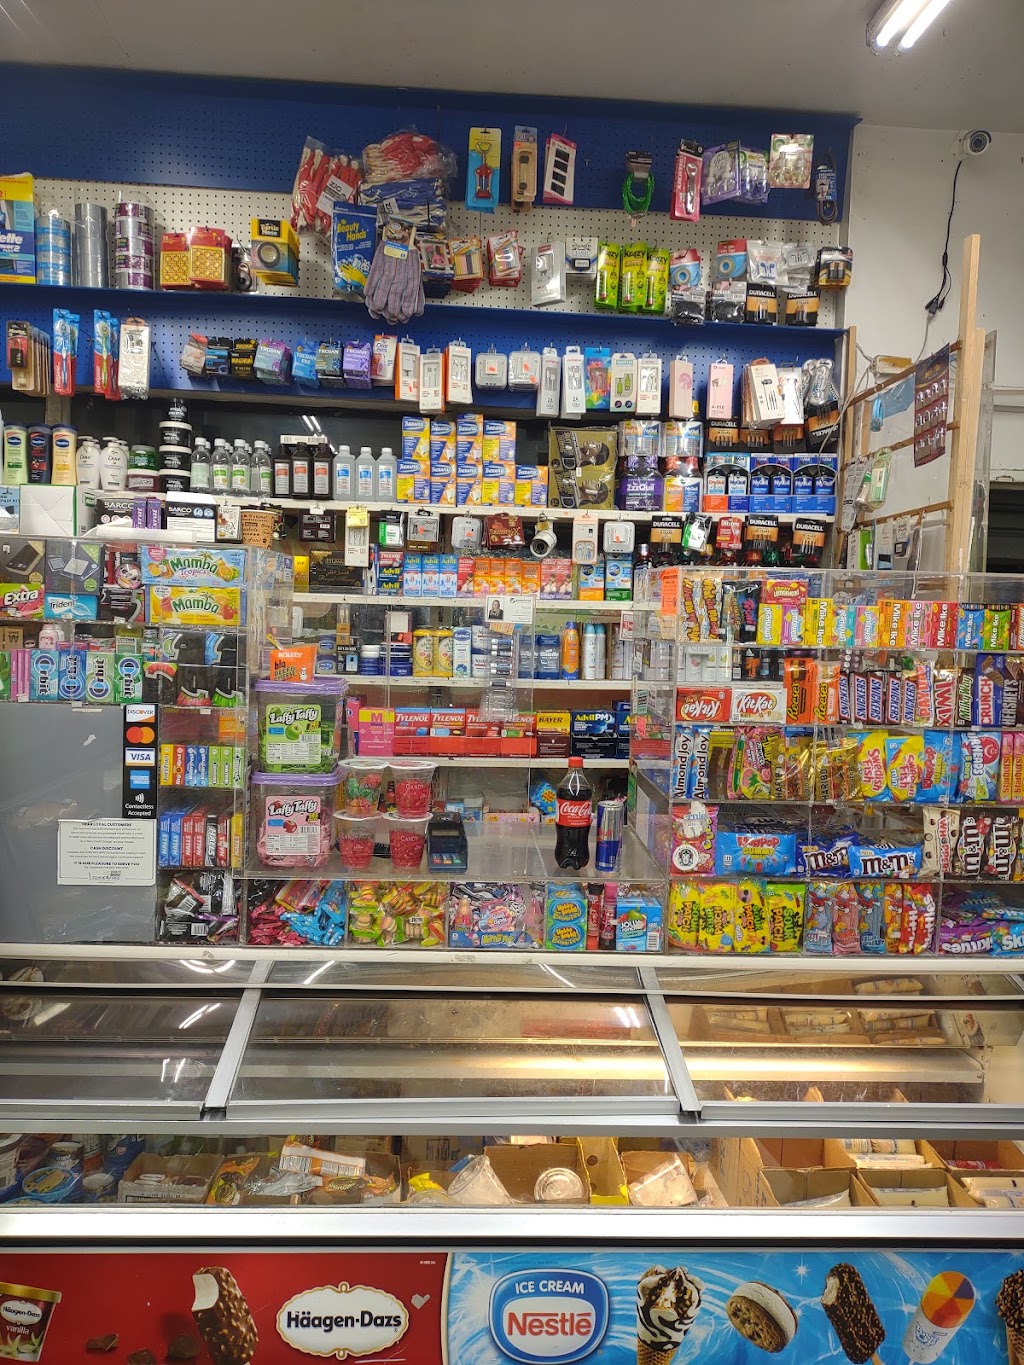 Ozone park deli & grocery | 95-01 104th St, Queens, NY 11416 | Phone: (347) 960-7404